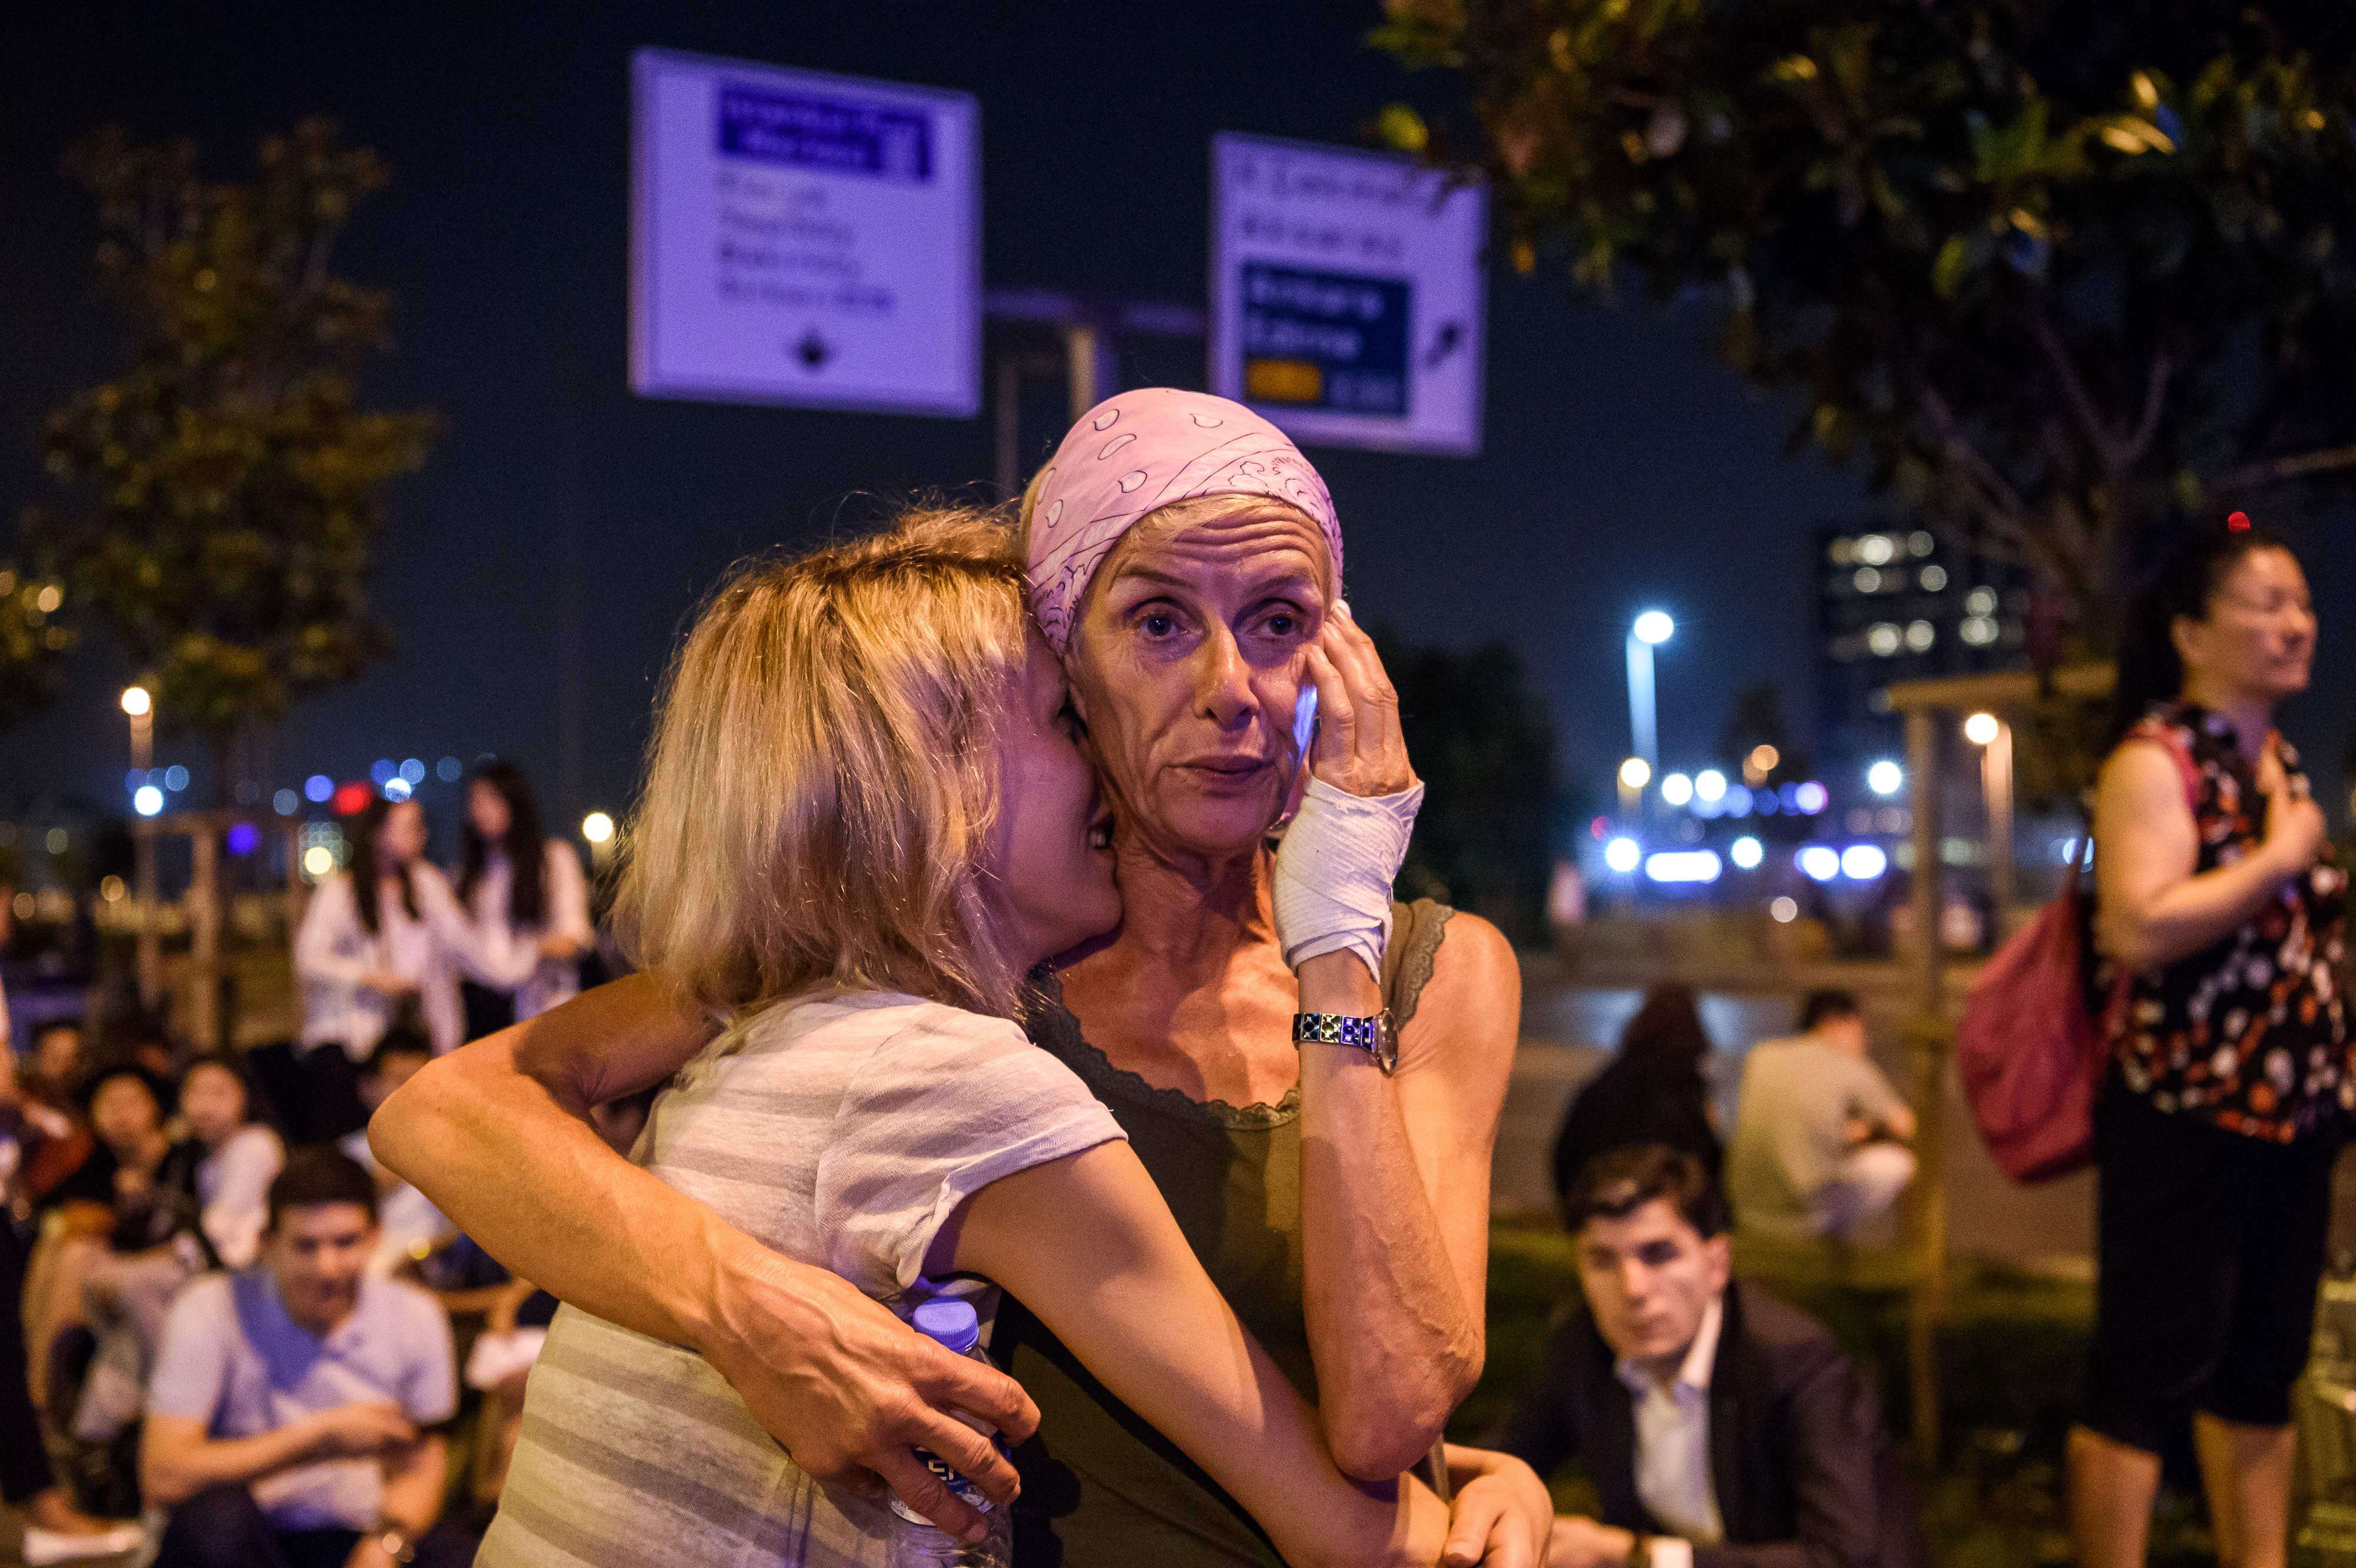 Passengers embrace outside Ataturk airport`s main entrance in Istanbul, after two explosions followed by gunfire hit Turkey's largest airport. Photo: AFP